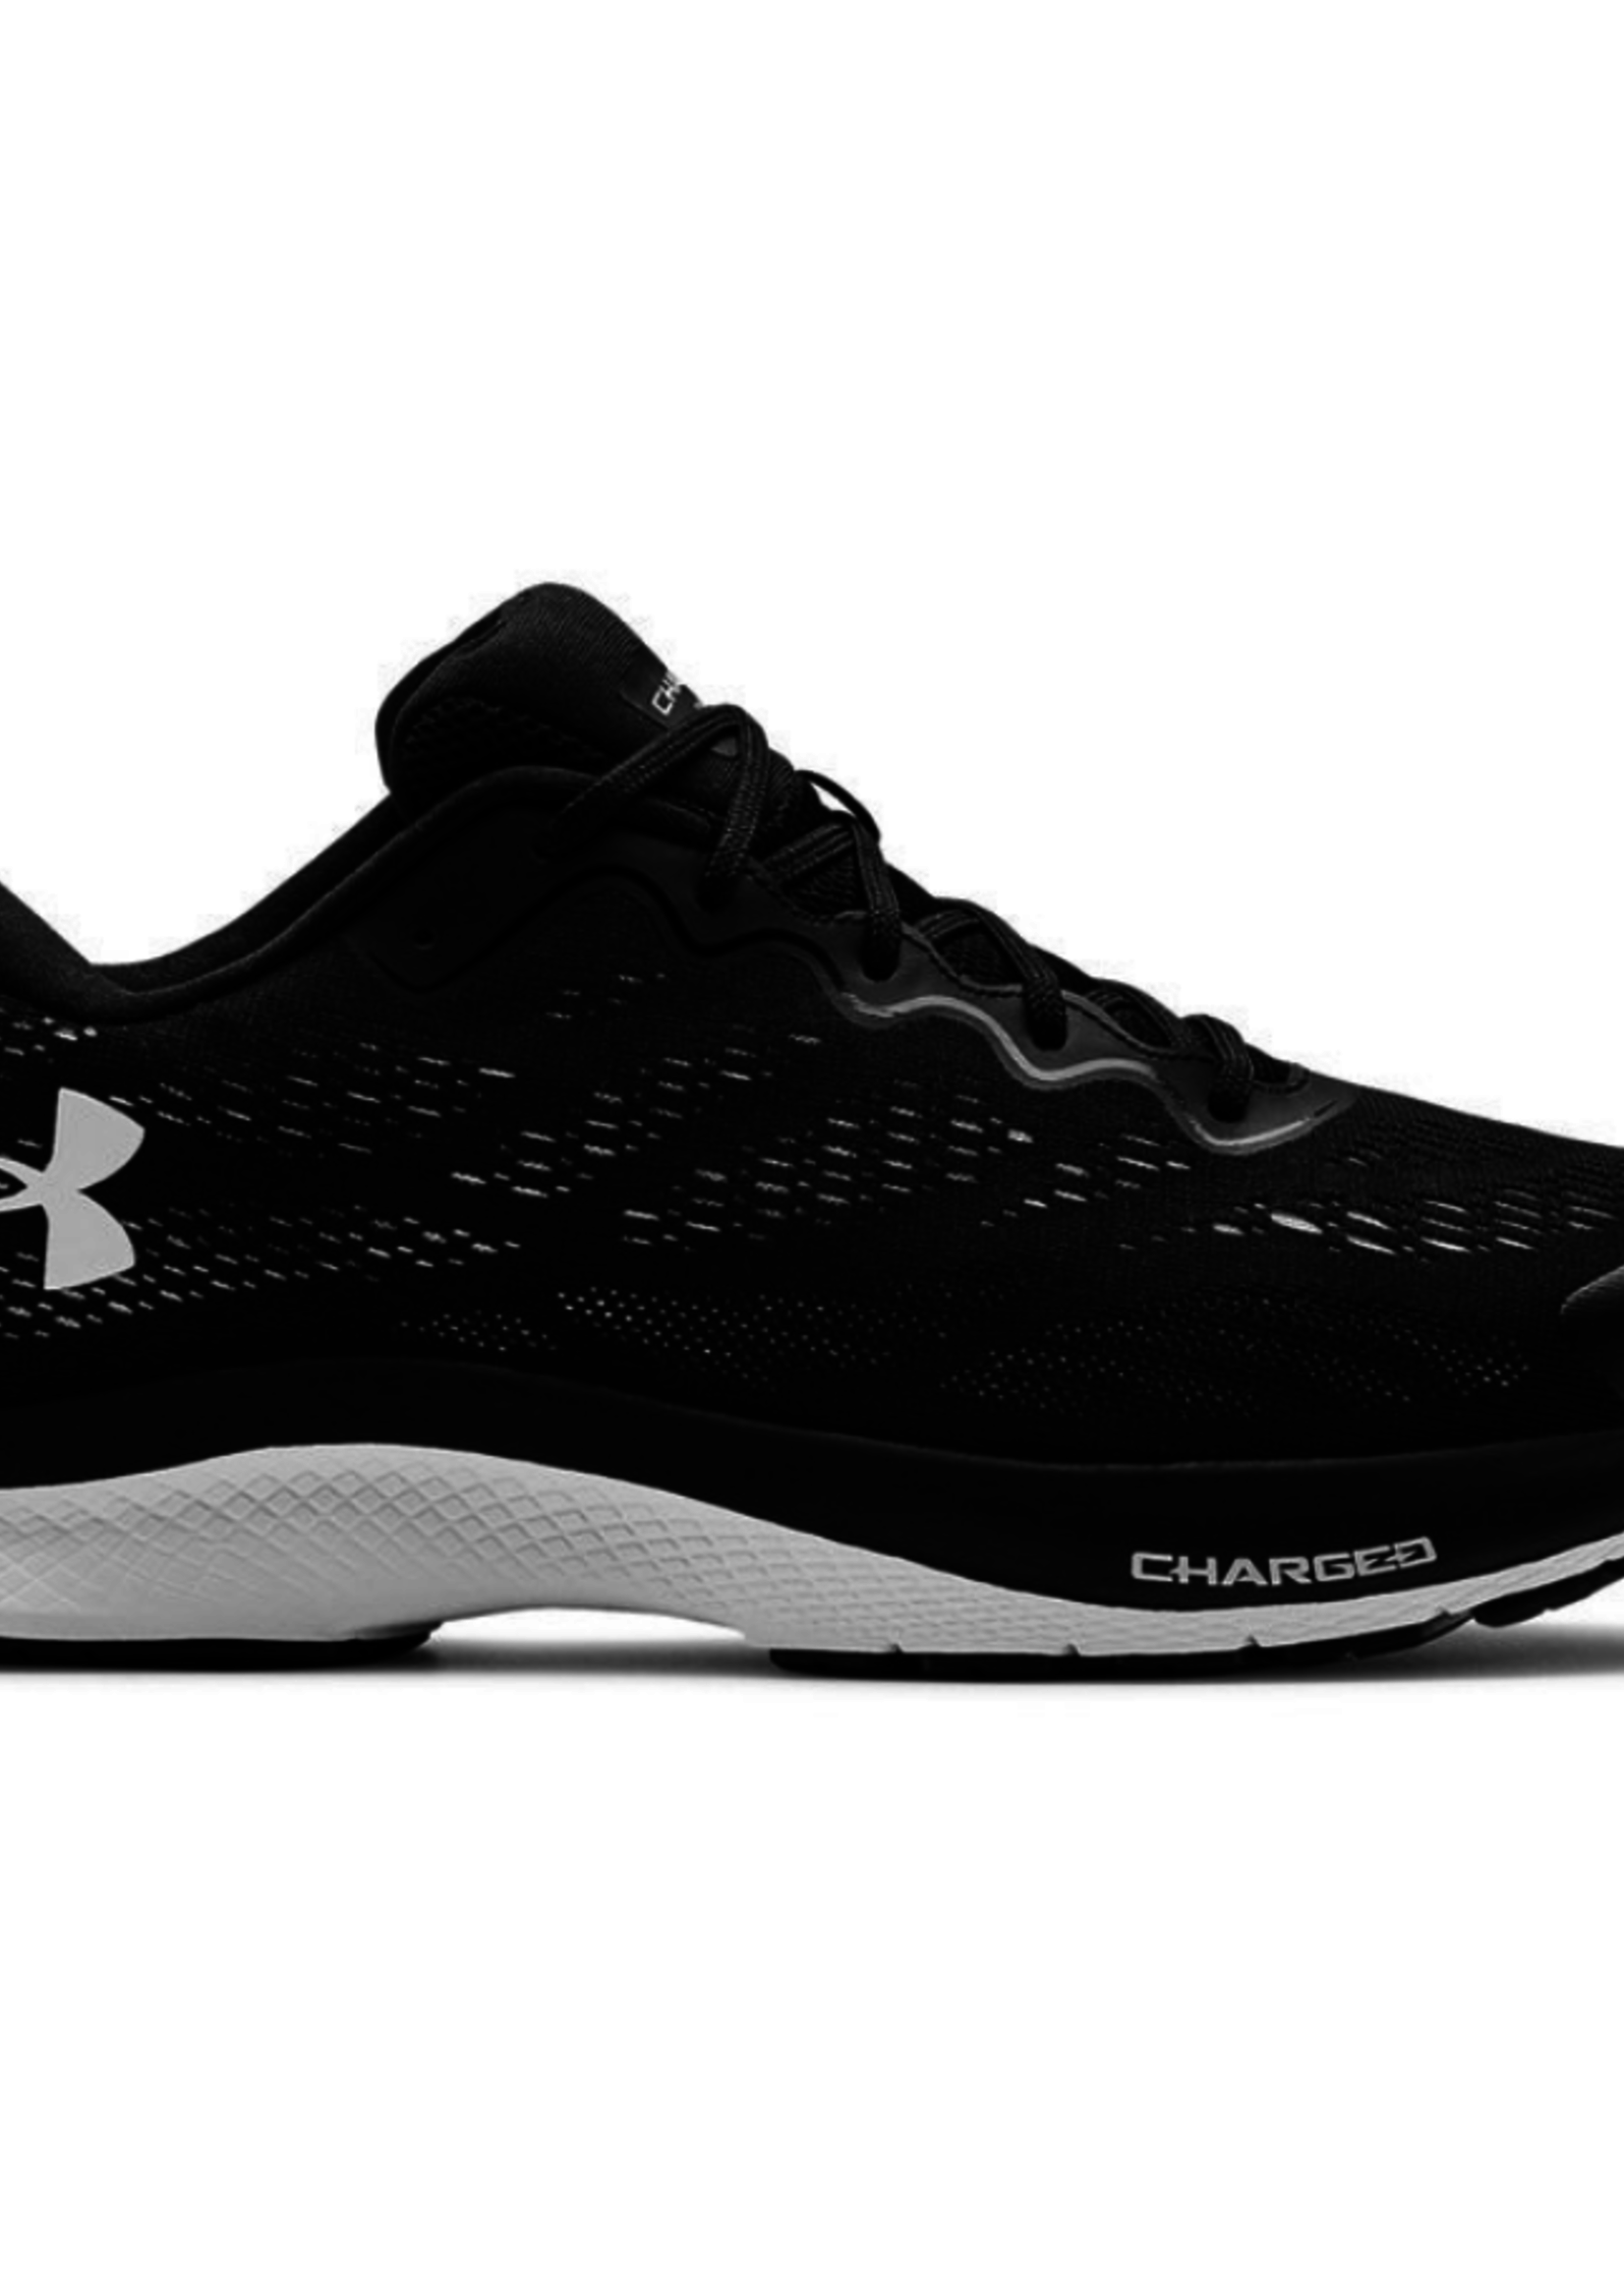 Under Armour MEN'S UA CHARGED BANDIT 6 RUNNING SHOES 3023019